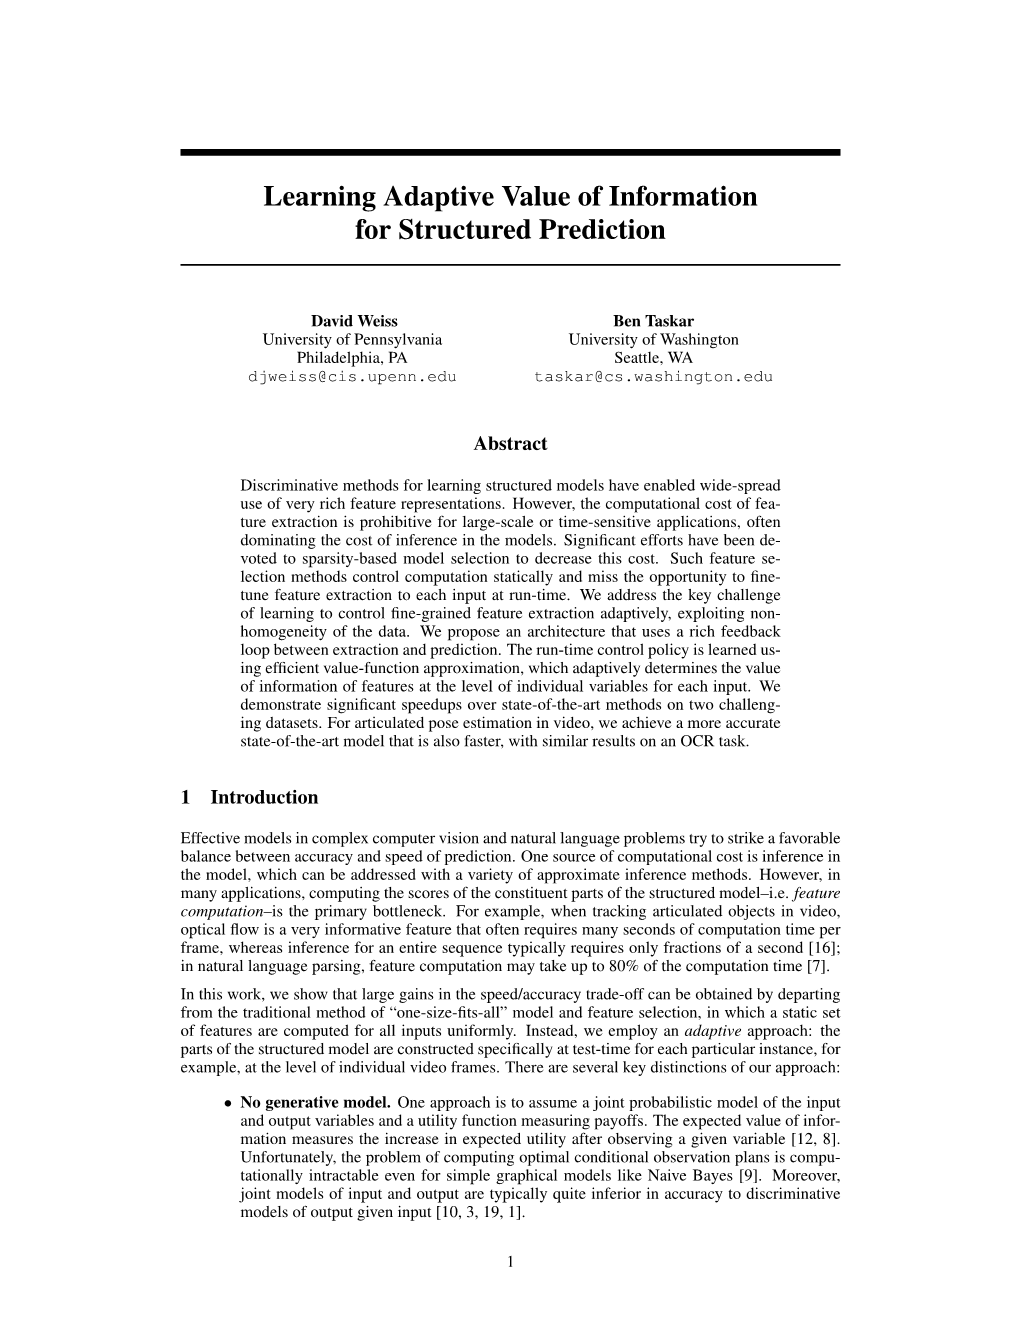 Learning Adaptive Value of Information for Structured Prediction